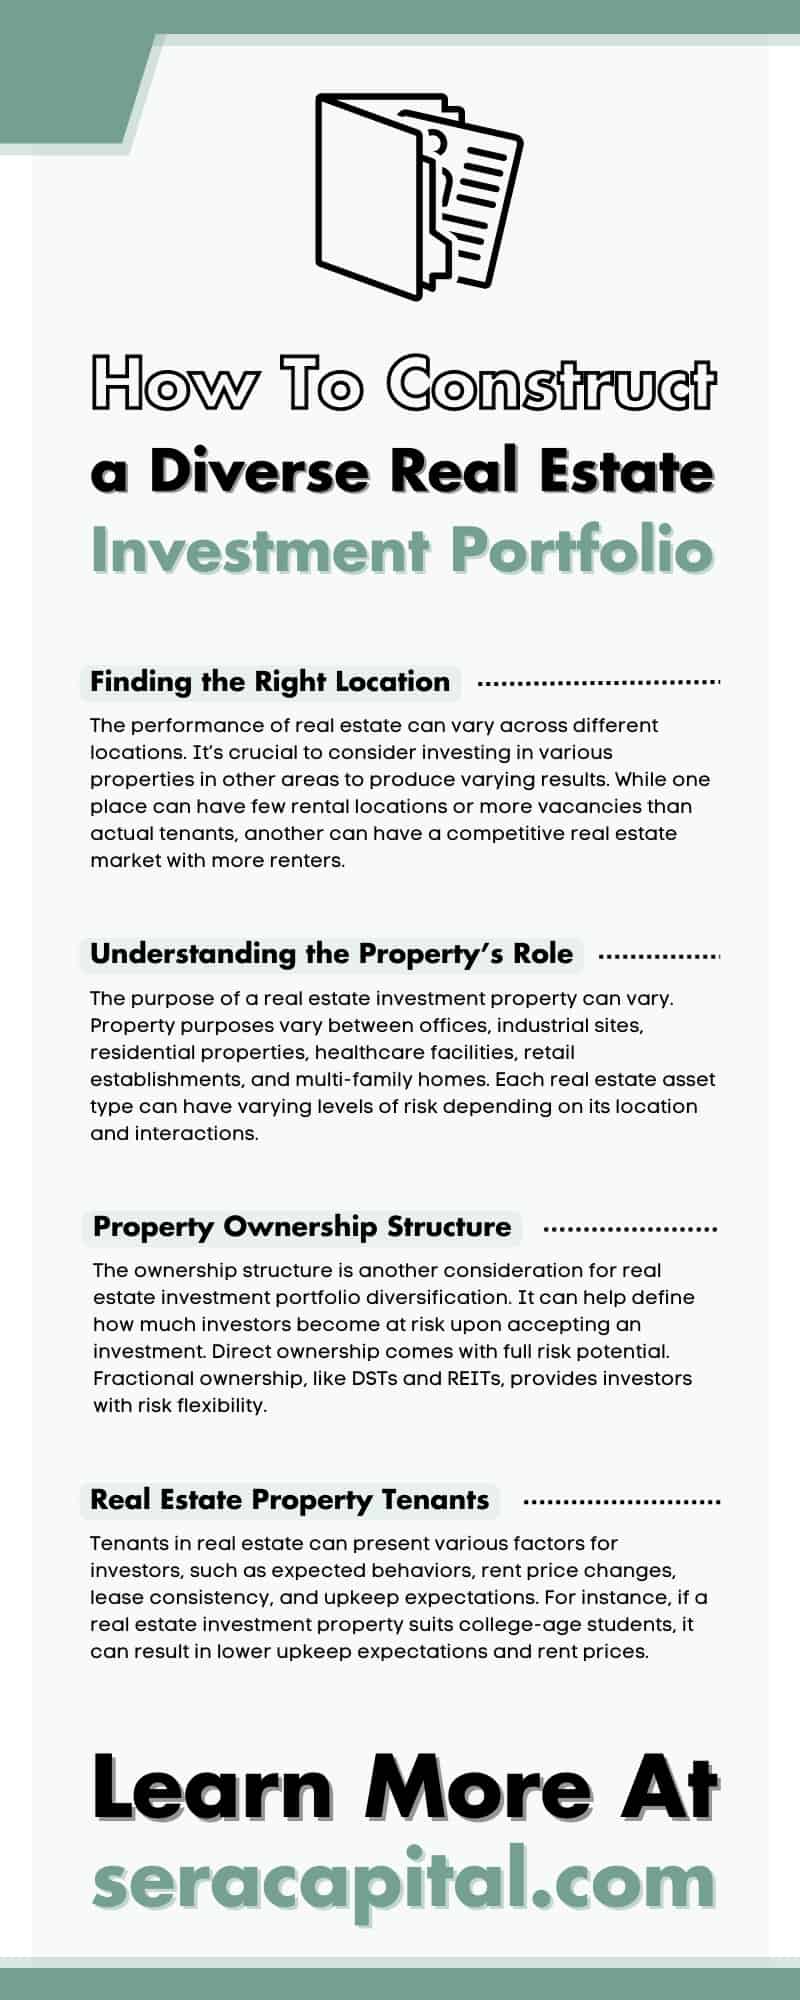 How To Construct a Diverse Real Estate Investment Portfolio